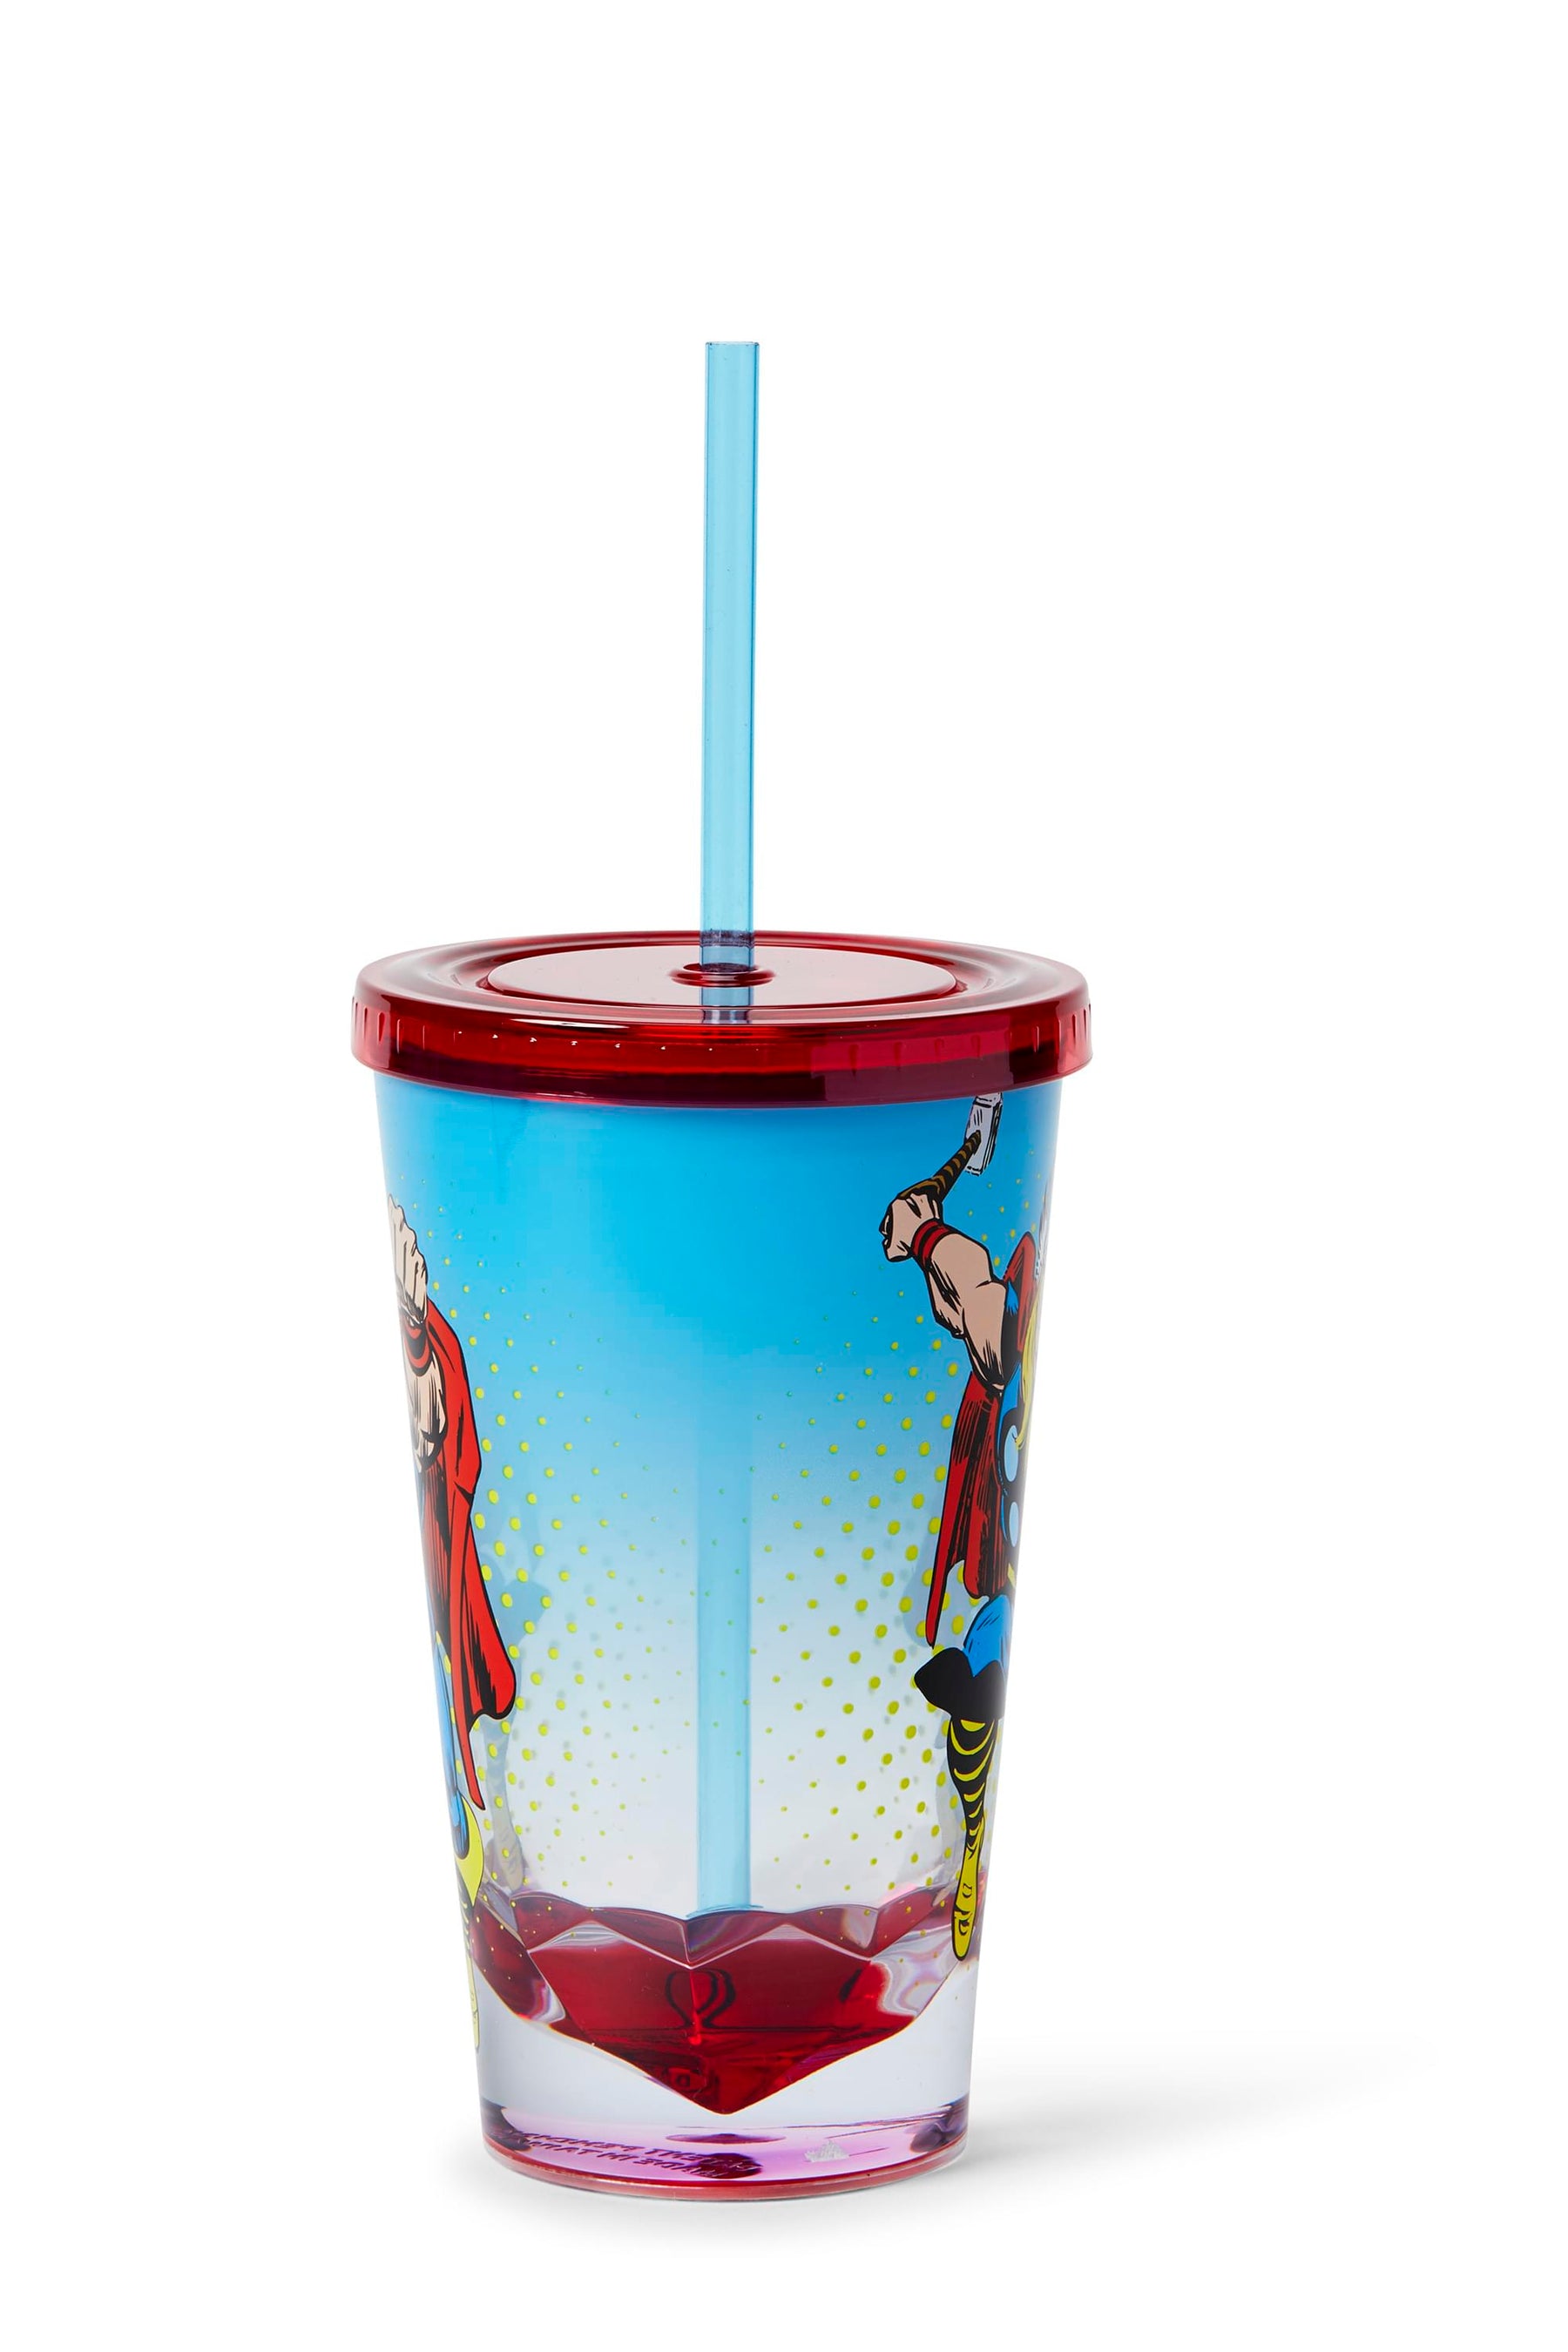 Marvel Thor God Of Thunder Plastic Tumbler Cup Lid & Straw | Holds 19 Ounces